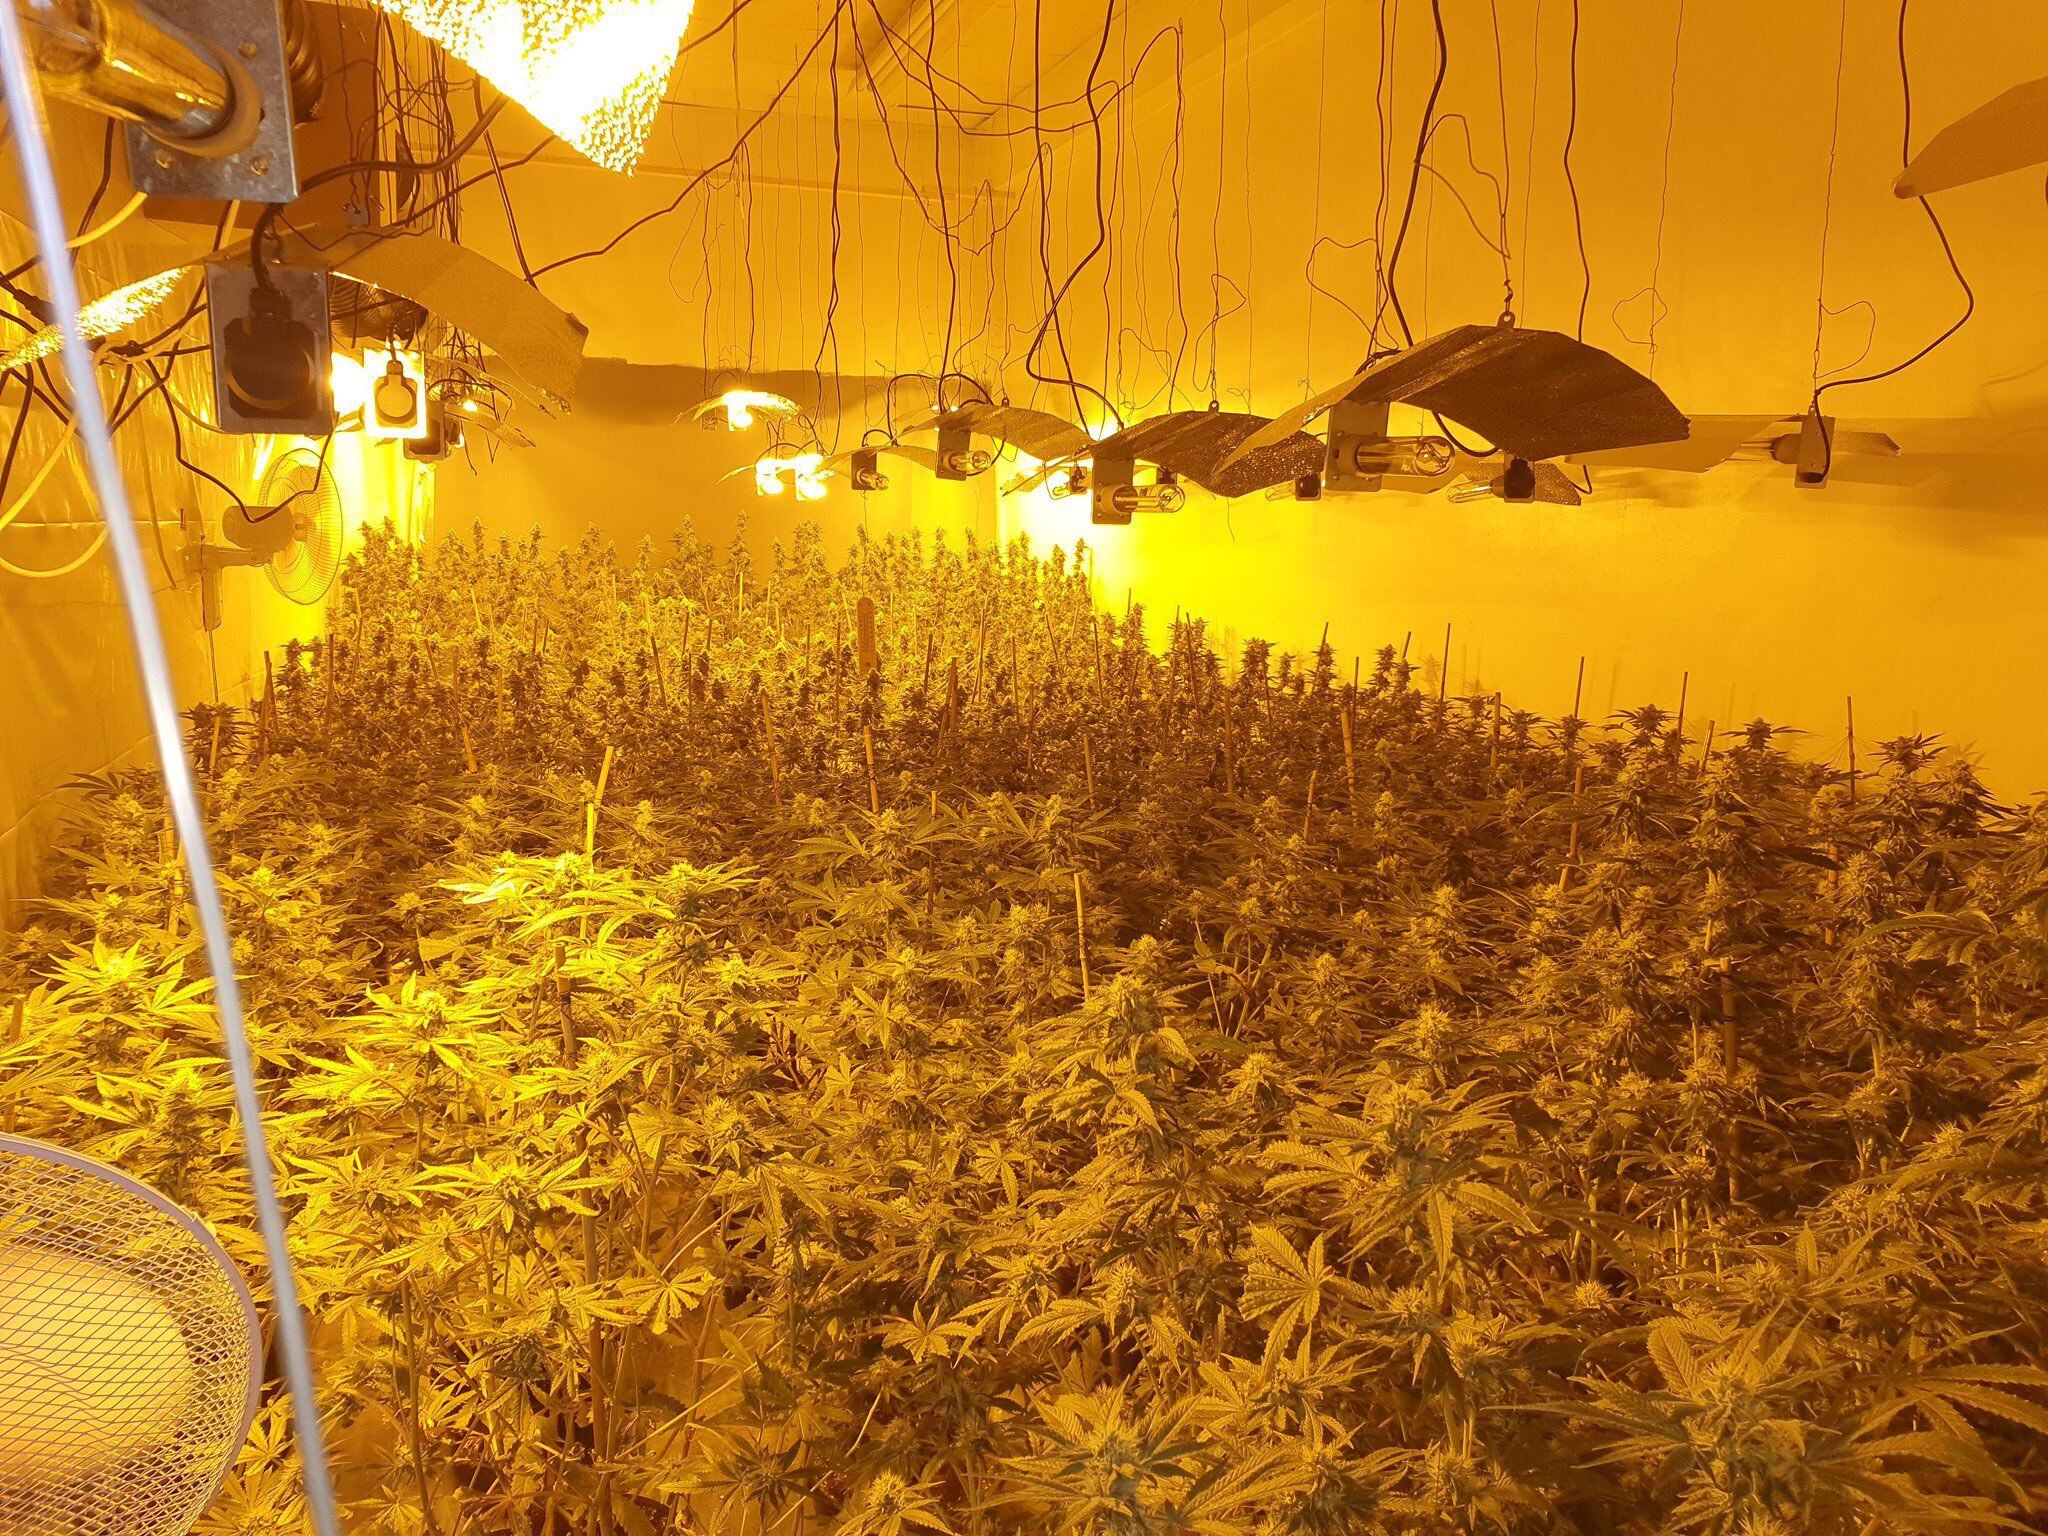 More than 300 cannabis plants found in Dudley property after police tip off